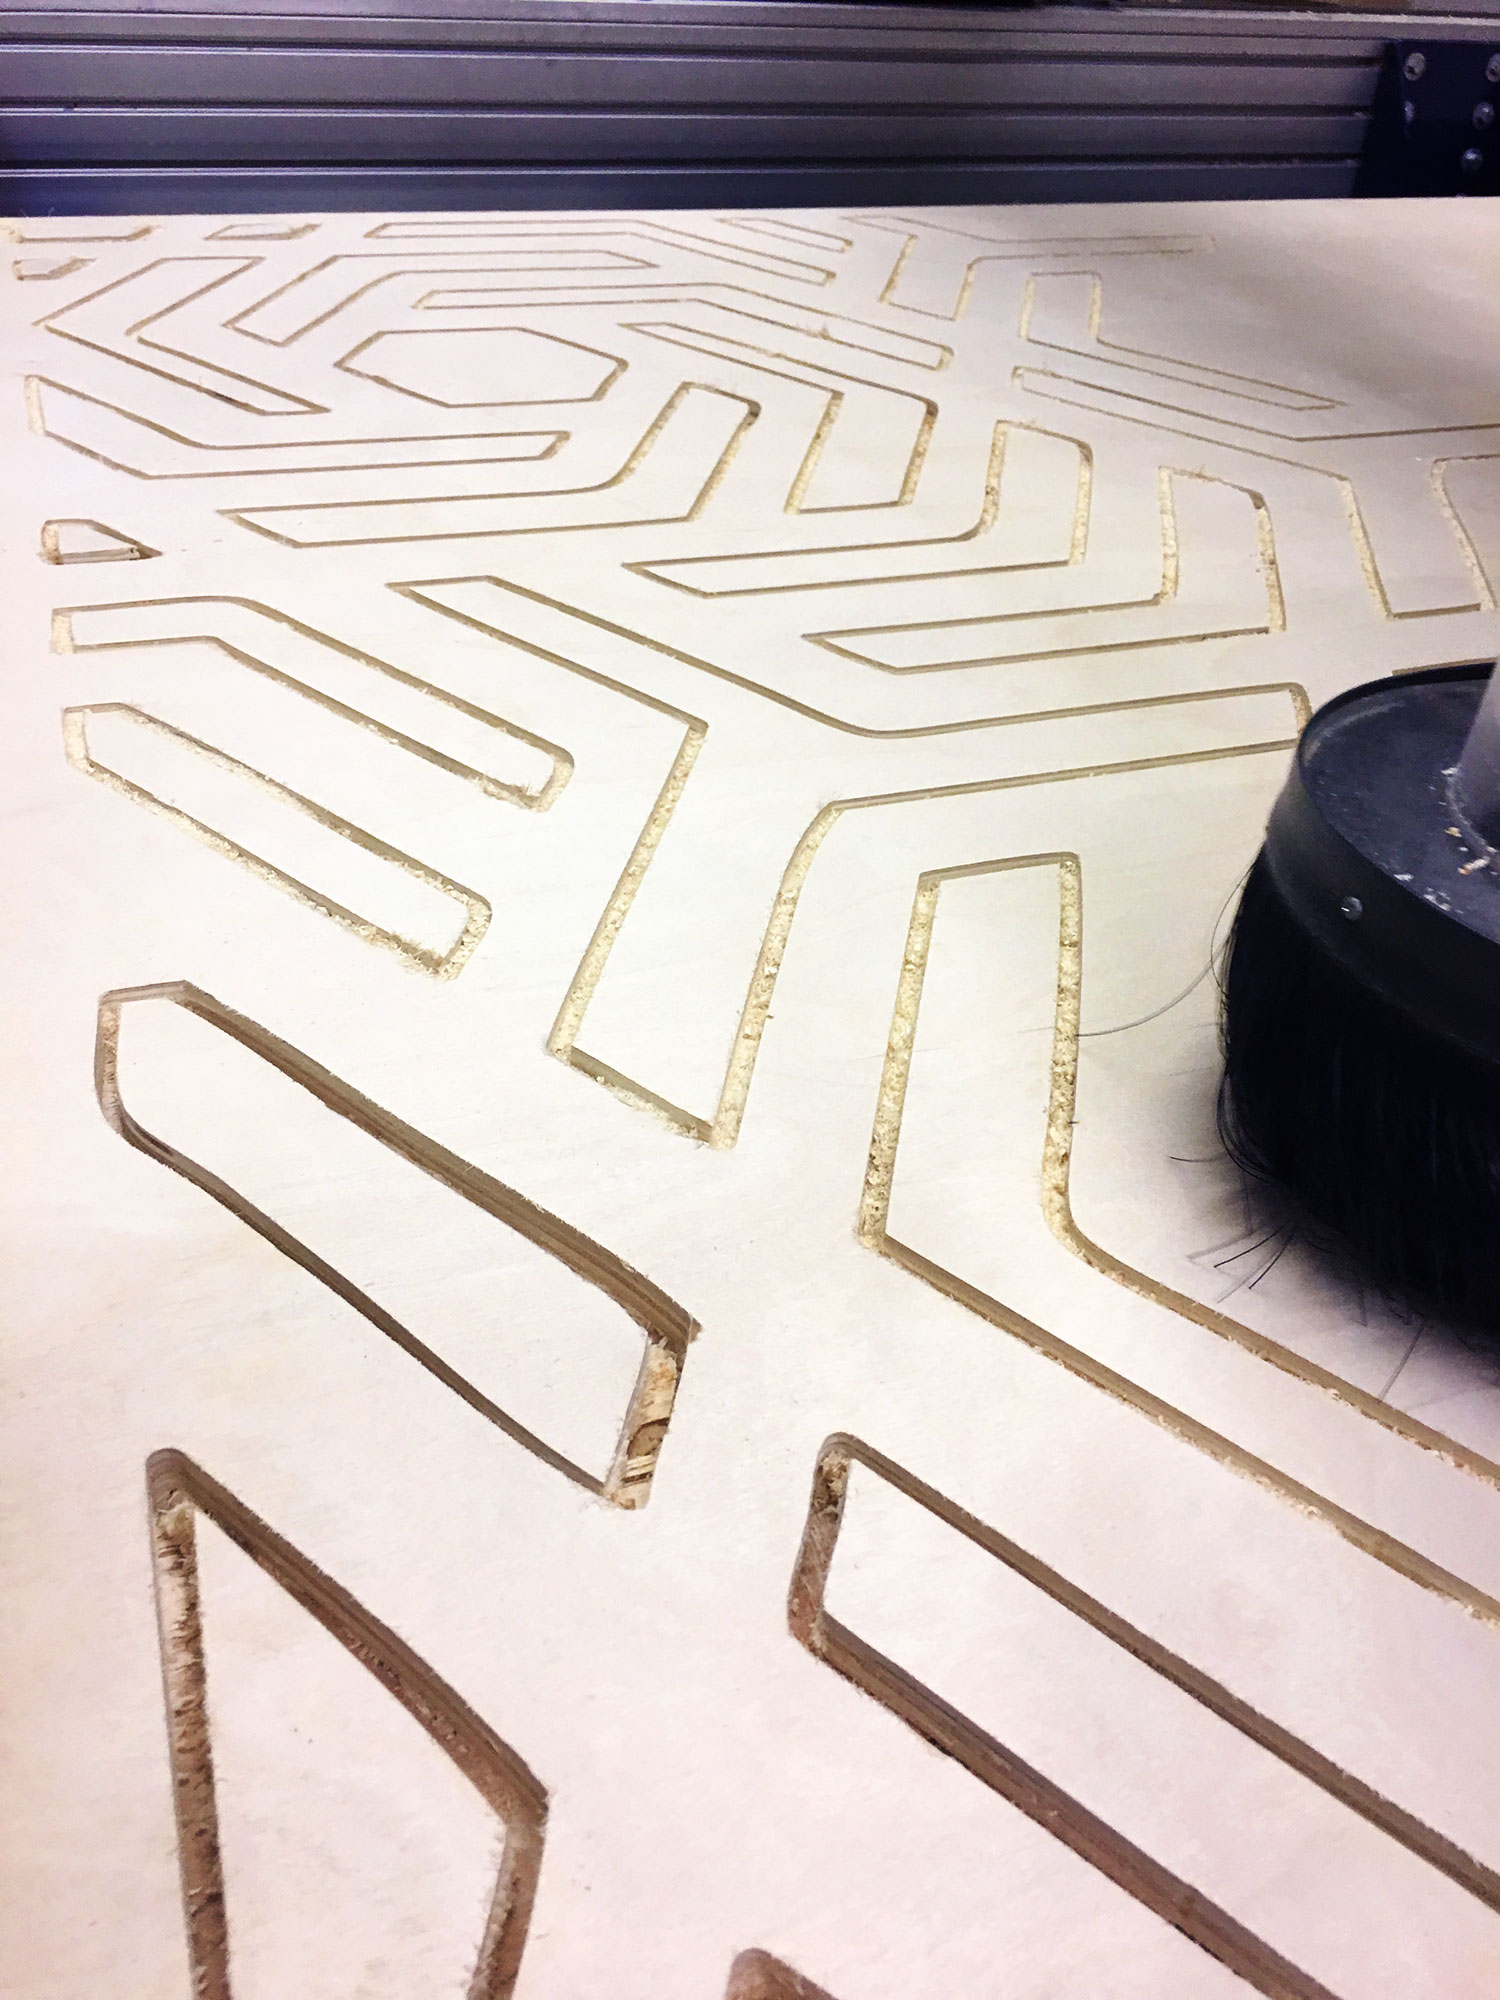 3 axis machine cutting custom shapes into wood panel